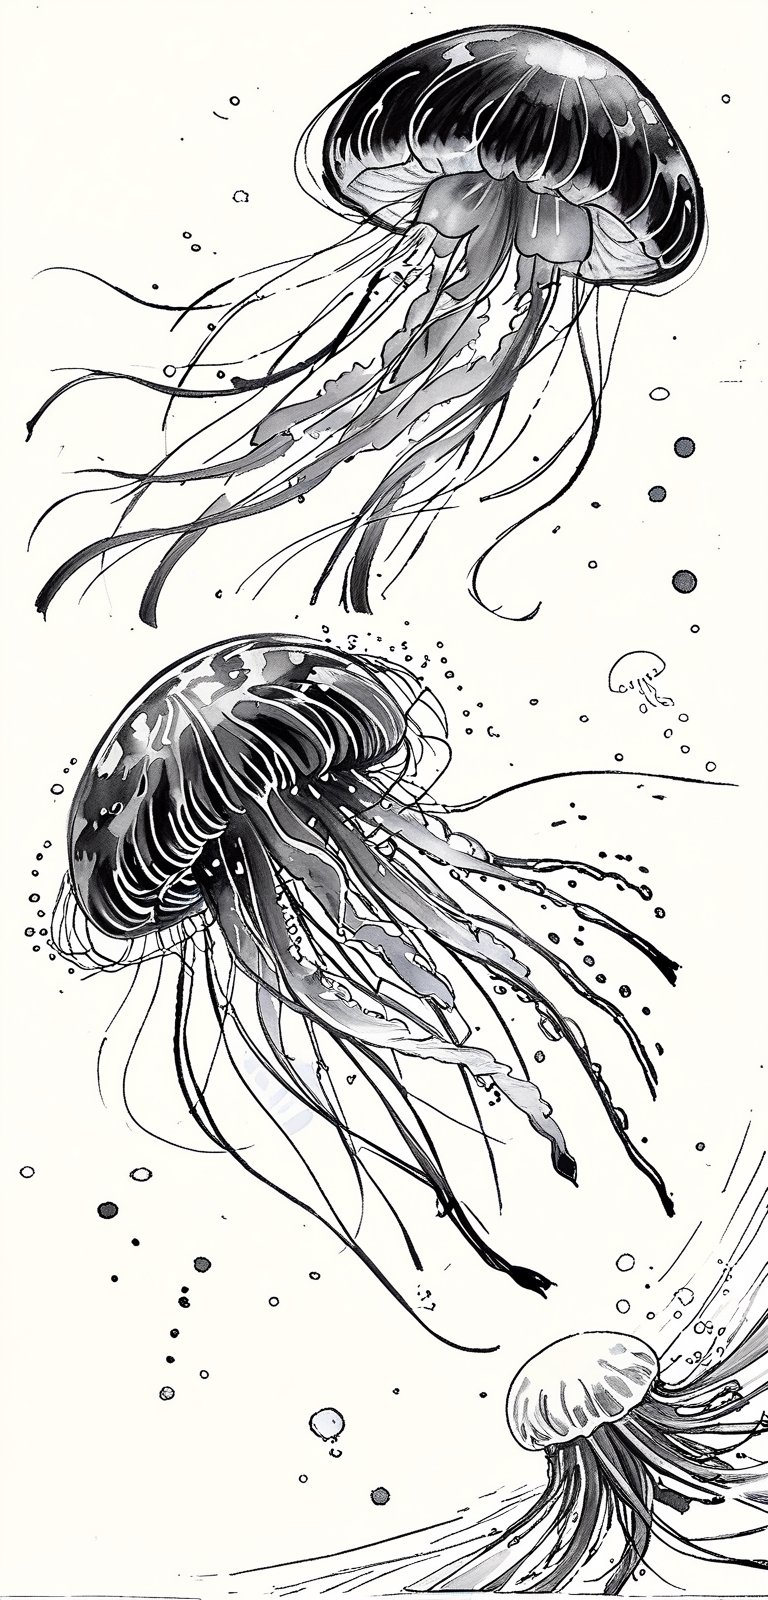 Jellyfish in a drawn style, on paper with sketch lines with charcoal pencils.